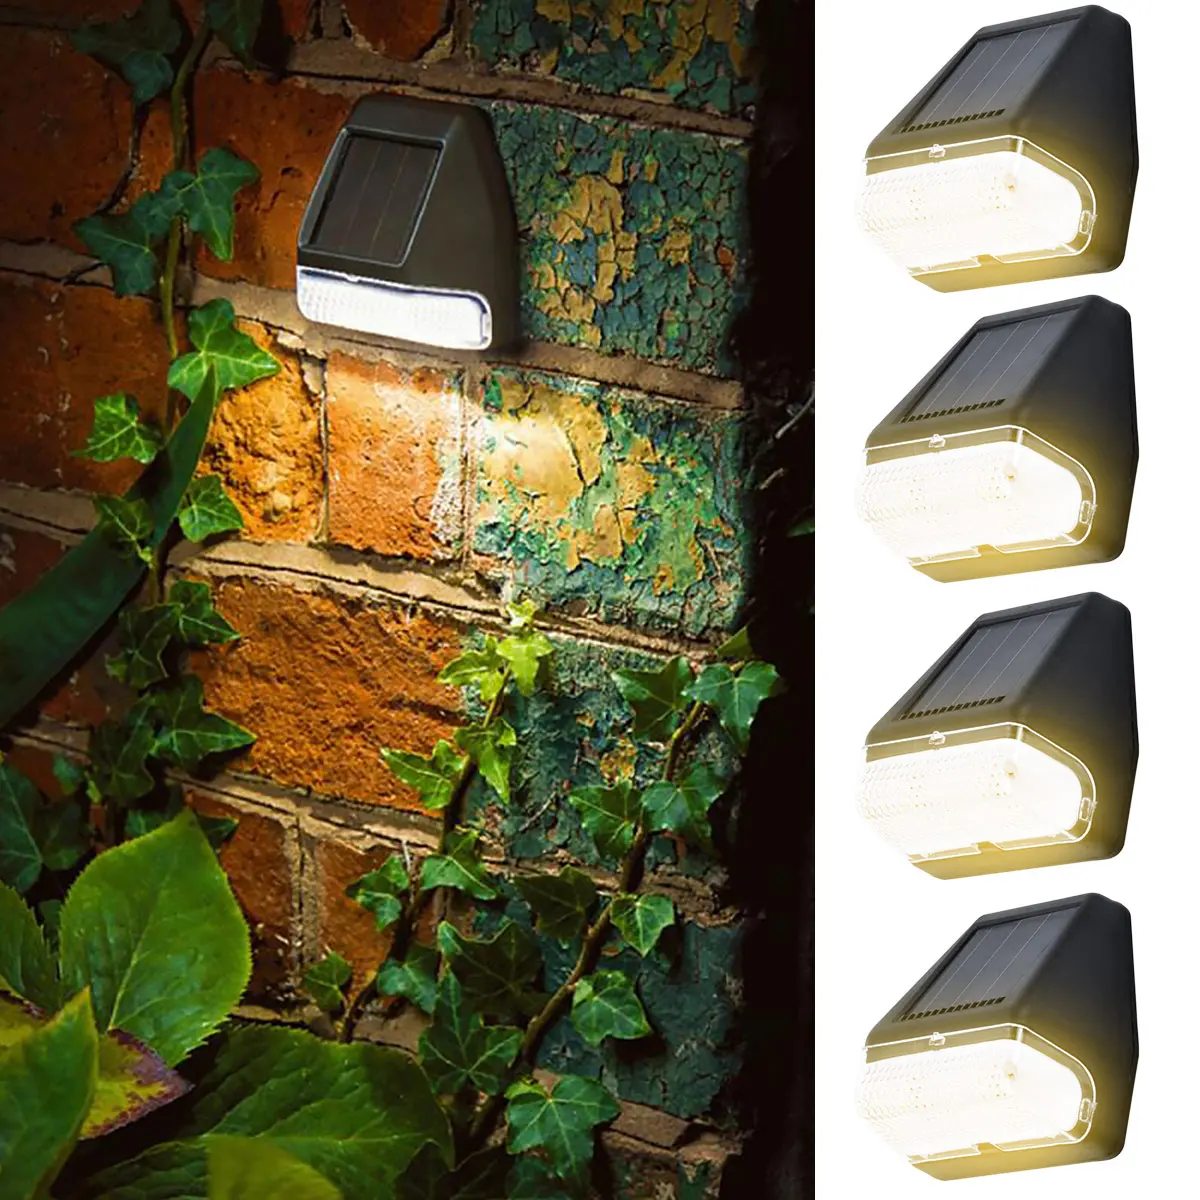 LED Solar Lamp Outdoor Path Stair Garden Lights Waterproof Balcony Warm White Light Decoration for Patio Stair Fence Night Light